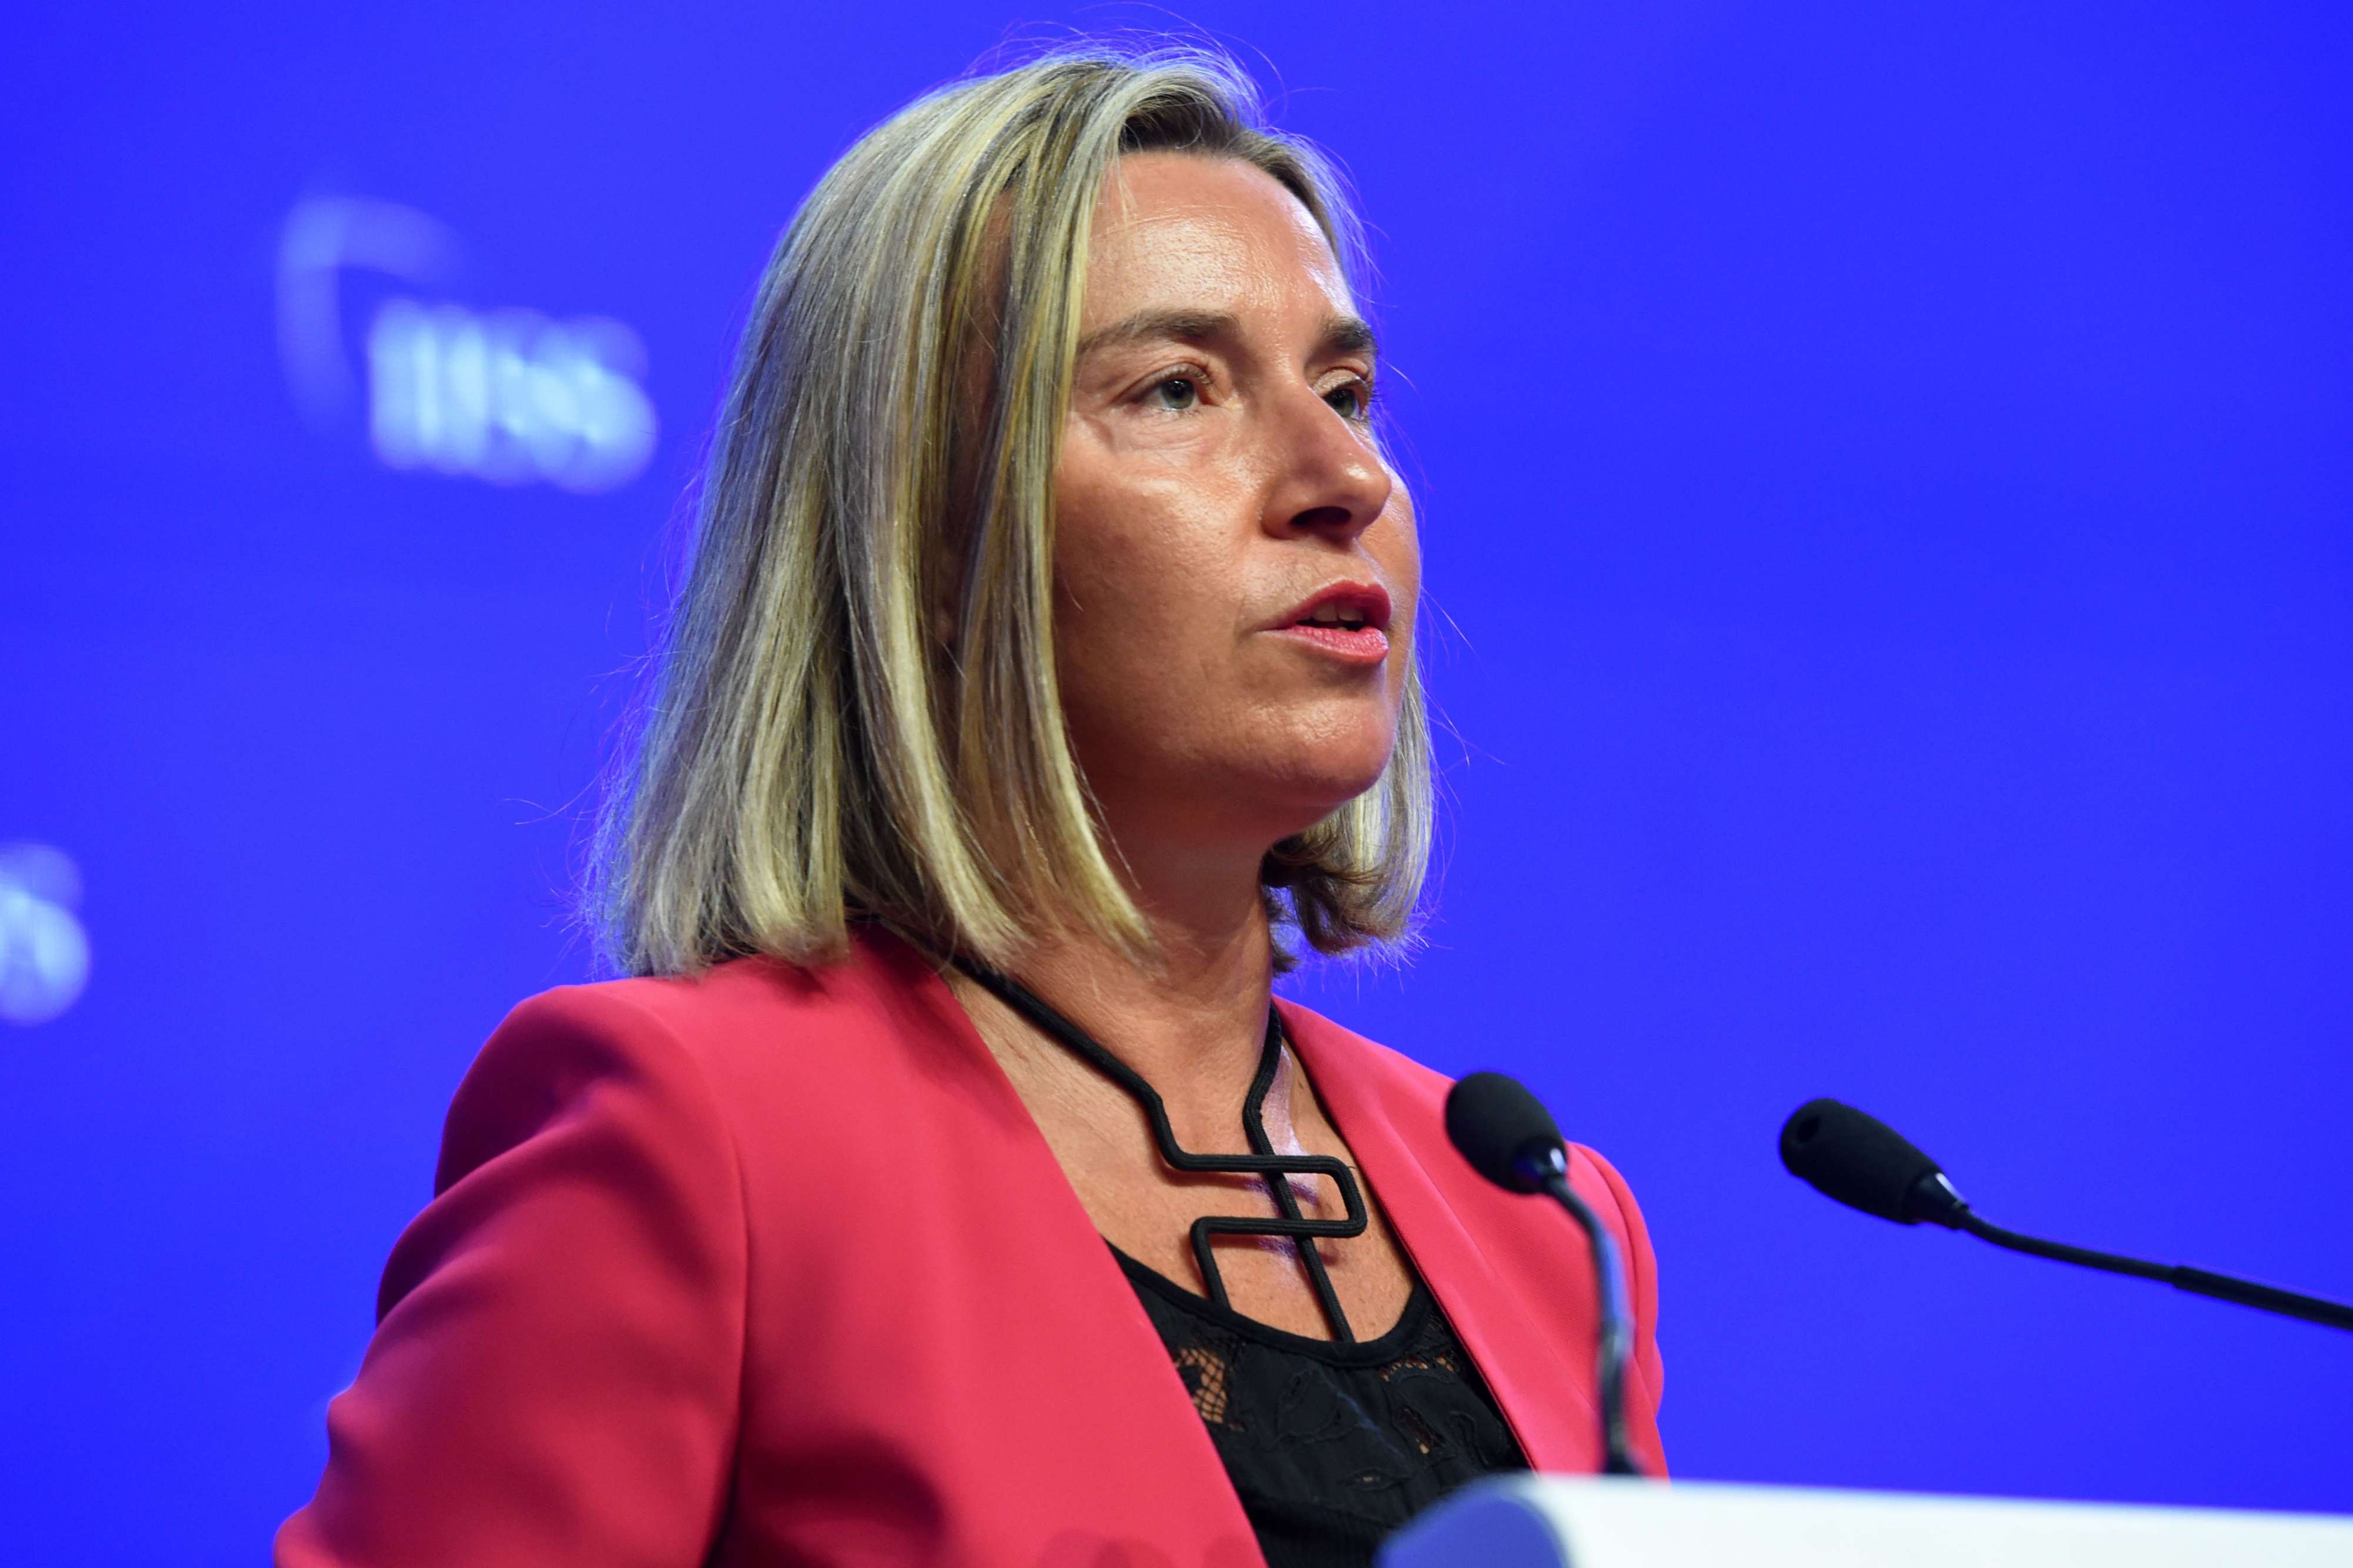 Spokeswoman for EU diplomatic chief Federica Mogherini, said the bloc was still gathering information on the incident